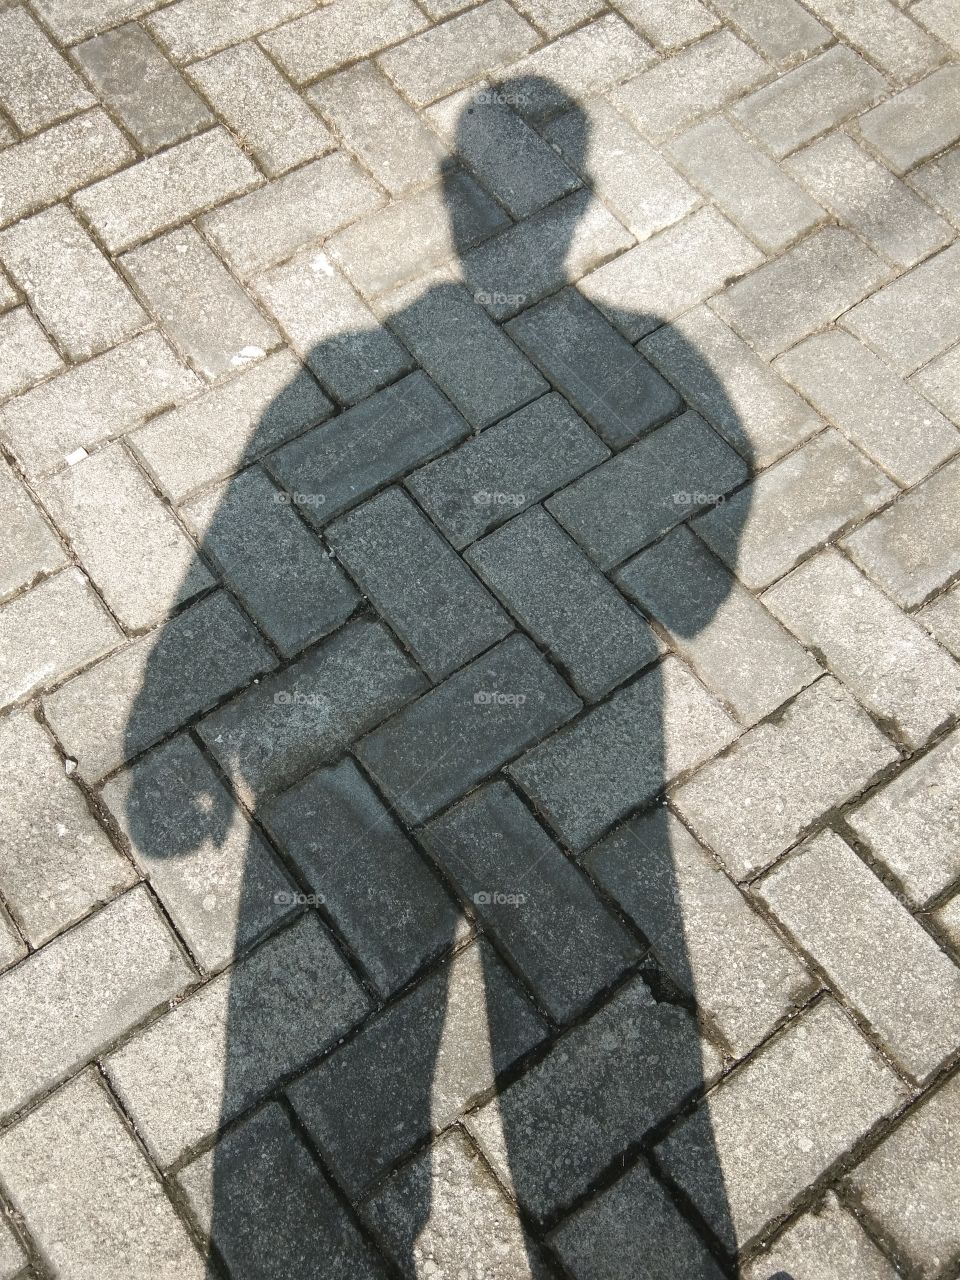 the shadow of the person standing on the road